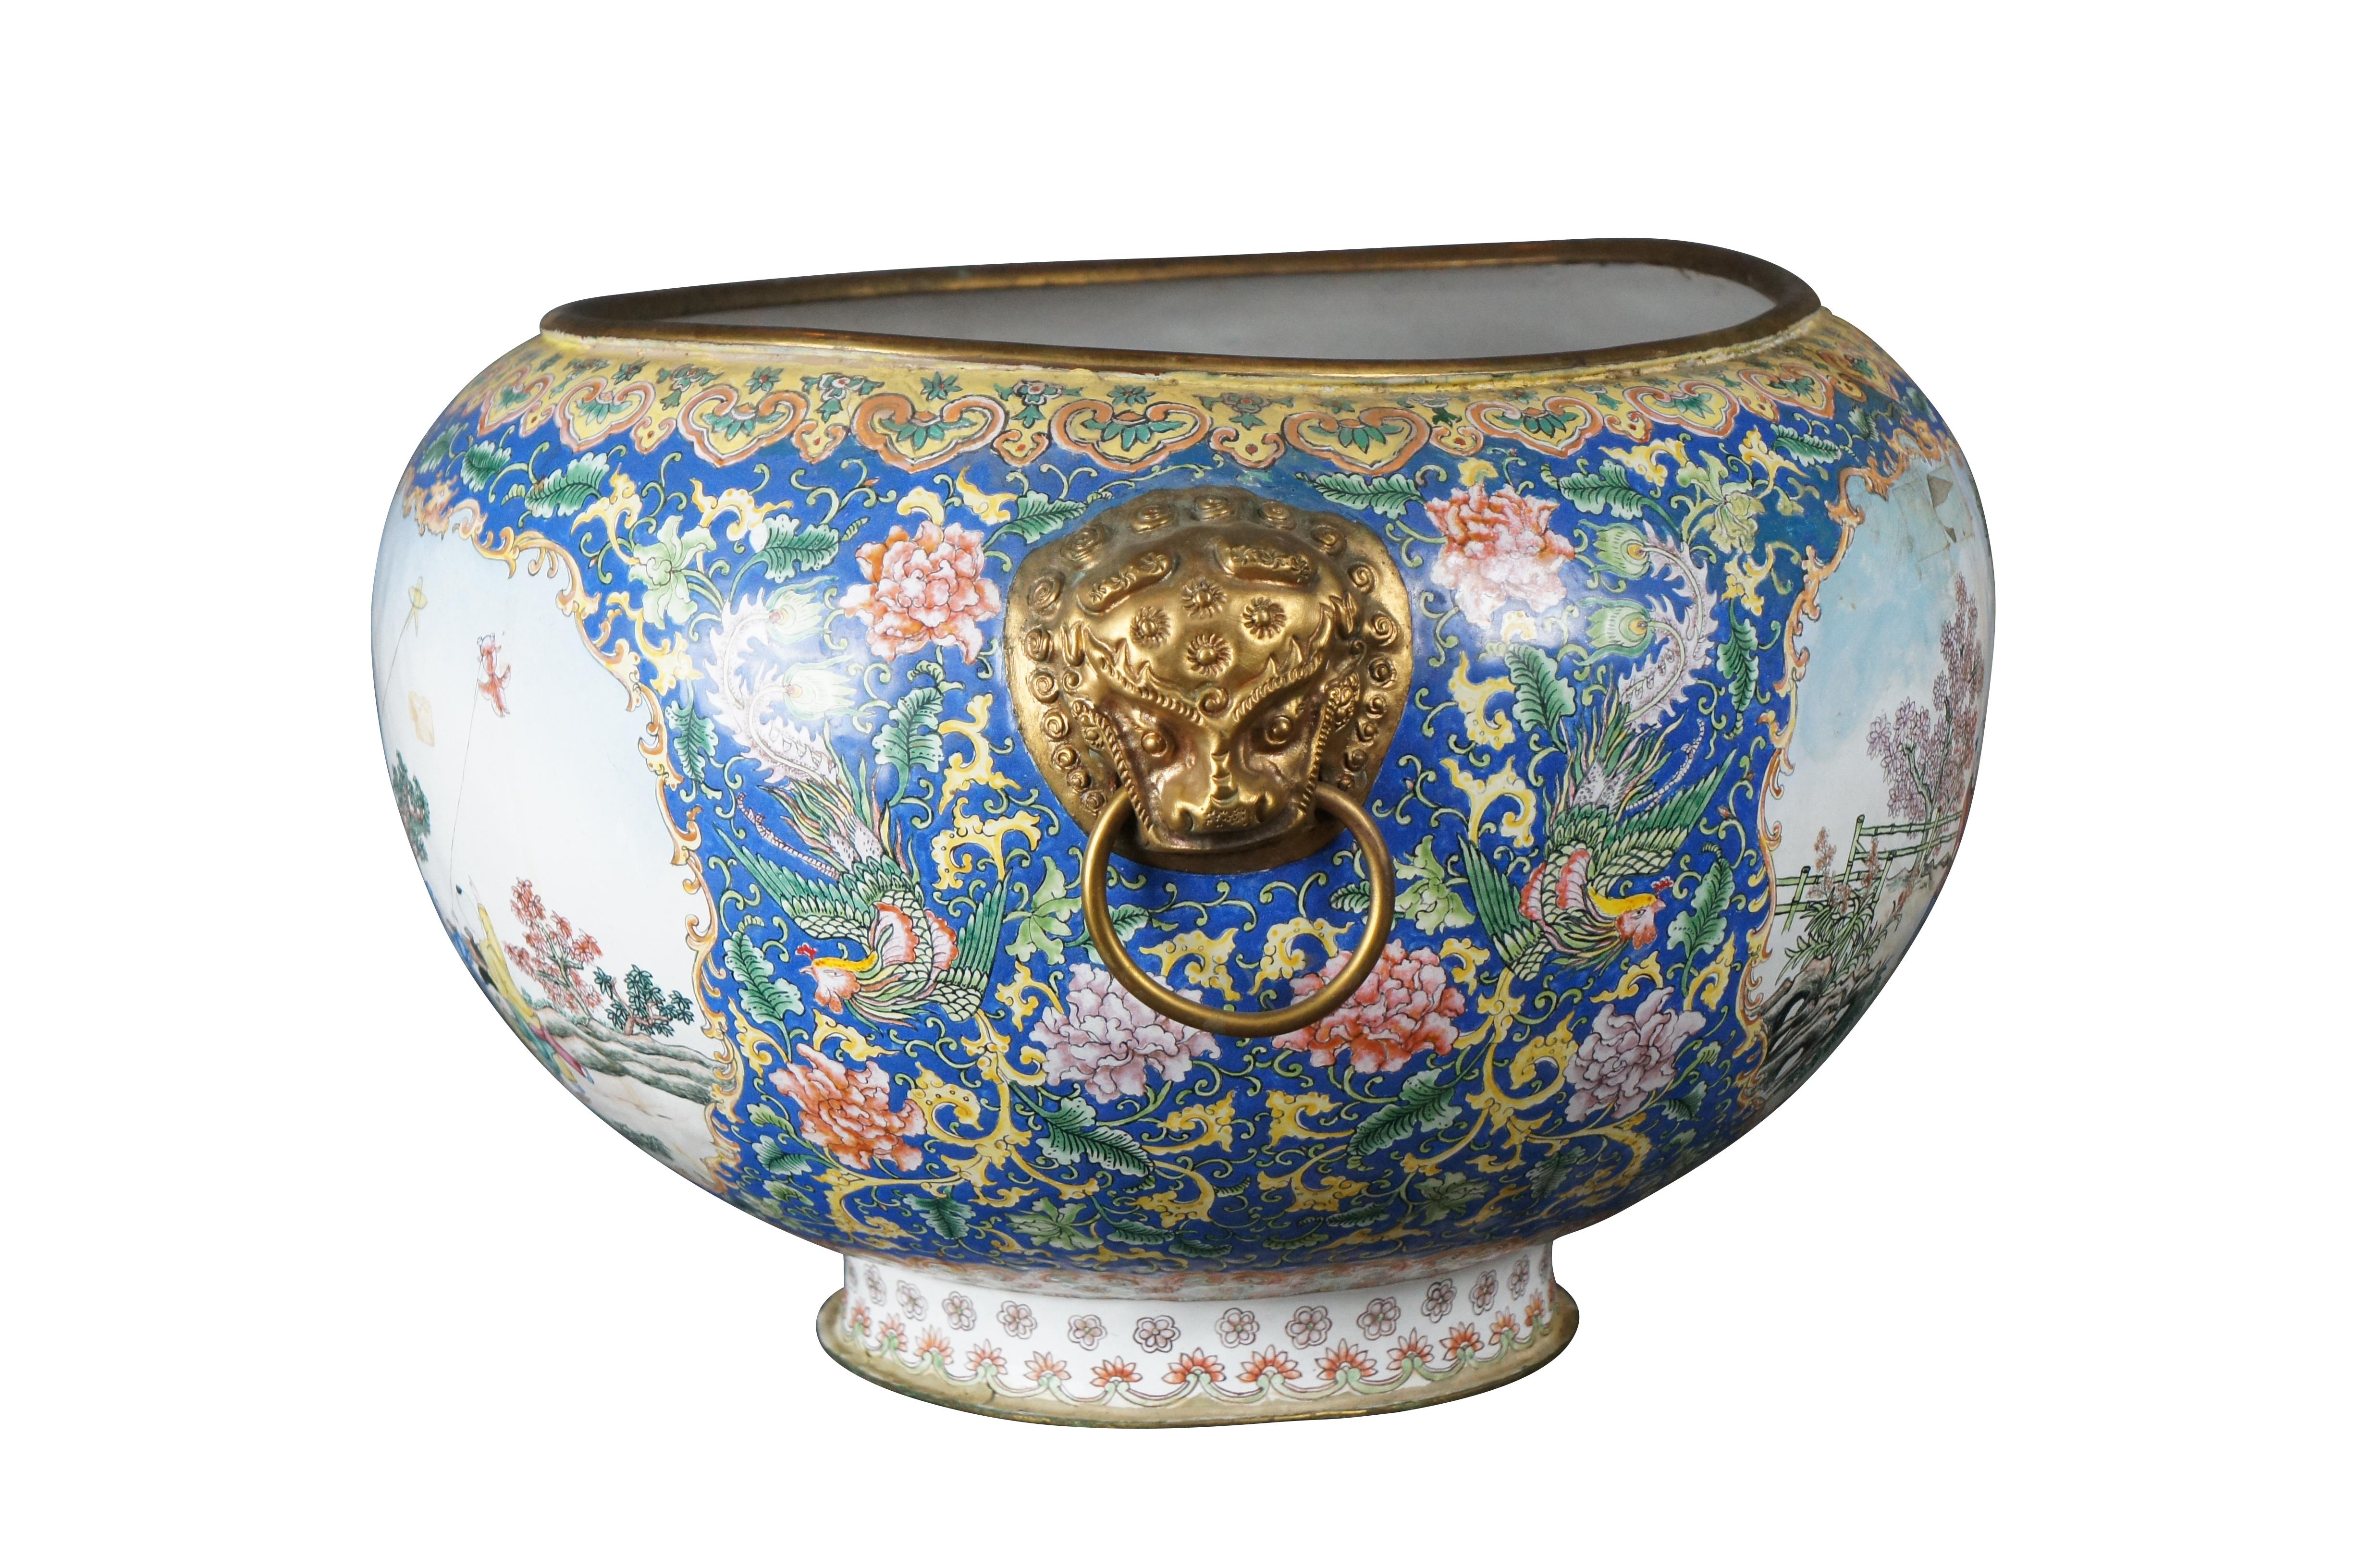 A large Chinese Canton Enamel Jardinière, circa 1900s. Features an ovoid form between two gilded metal animal masks with hoop handles. The bowl is decorated in bright enamels with a large cartouche showing a Chinese family flying animal figured